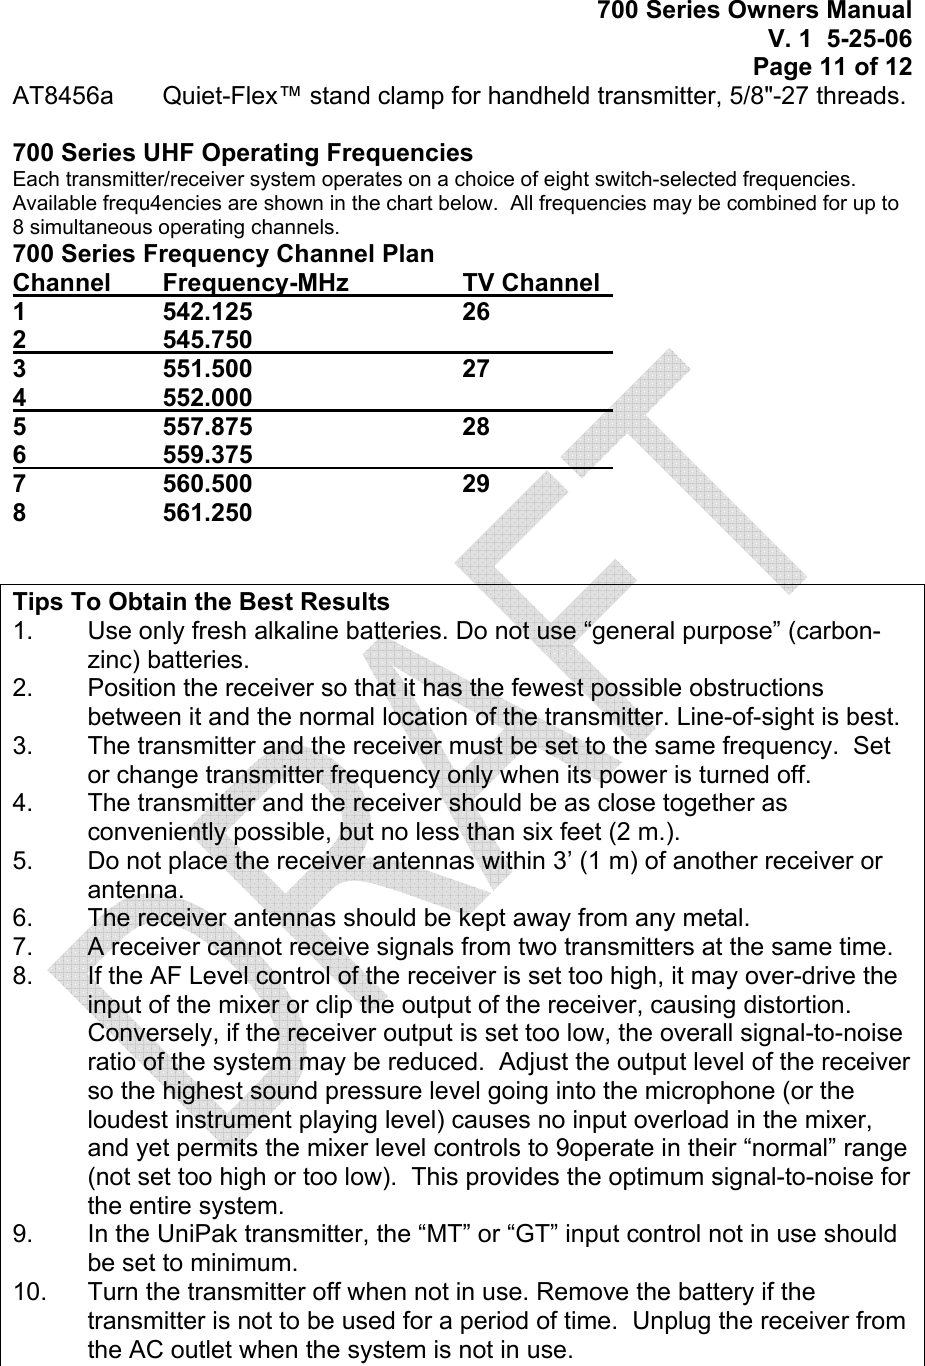 700 Series Owners Manual V. 1  5-25-06 Page 11 of 12 AT8456a   Quiet-Flex™ stand clamp for handheld transmitter, 5/8&quot;-27 threads.  700 Series UHF Operating Frequencies Each transmitter/receiver system operates on a choice of eight switch-selected frequencies.  Available frequ4encies are shown in the chart below.  All frequencies may be combined for up to 8 simultaneous operating channels. 700 Series Frequency Channel Plan Channel    Frequency-MHz    TV Channel   1  542.125   26 2  545.750      3  551.500   27 4  552.000       5  557.875   28 6  559.375       7  560.500   29 8  561.250       Tips To Obtain the Best Results 1.   Use only fresh alkaline batteries. Do not use “general purpose” (carbon-zinc) batteries. 2.   Position the receiver so that it has the fewest possible obstructions between it and the normal location of the transmitter. Line-of-sight is best. 3.   The transmitter and the receiver must be set to the same frequency.  Set or change transmitter frequency only when its power is turned off. 4.   The transmitter and the receiver should be as close together as conveniently possible, but no less than six feet (2 m.). 5.   Do not place the receiver antennas within 3’ (1 m) of another receiver or antenna. 6.   The receiver antennas should be kept away from any metal.   7.   A receiver cannot receive signals from two transmitters at the same time. 8.   If the AF Level control of the receiver is set too high, it may over-drive the input of the mixer or clip the output of the receiver, causing distortion. Conversely, if the receiver output is set too low, the overall signal-to-noise ratio of the system may be reduced.  Adjust the output level of the receiver so the highest sound pressure level going into the microphone (or the loudest instrument playing level) causes no input overload in the mixer, and yet permits the mixer level controls to 9operate in their “normal” range (not set too high or too low).  This provides the optimum signal-to-noise for the entire system. 9.   In the UniPak transmitter, the “MT” or “GT” input control not in use should be set to minimum. 10.   Turn the transmitter off when not in use. Remove the battery if the transmitter is not to be used for a period of time.  Unplug the receiver from the AC outlet when the system is not in use.  